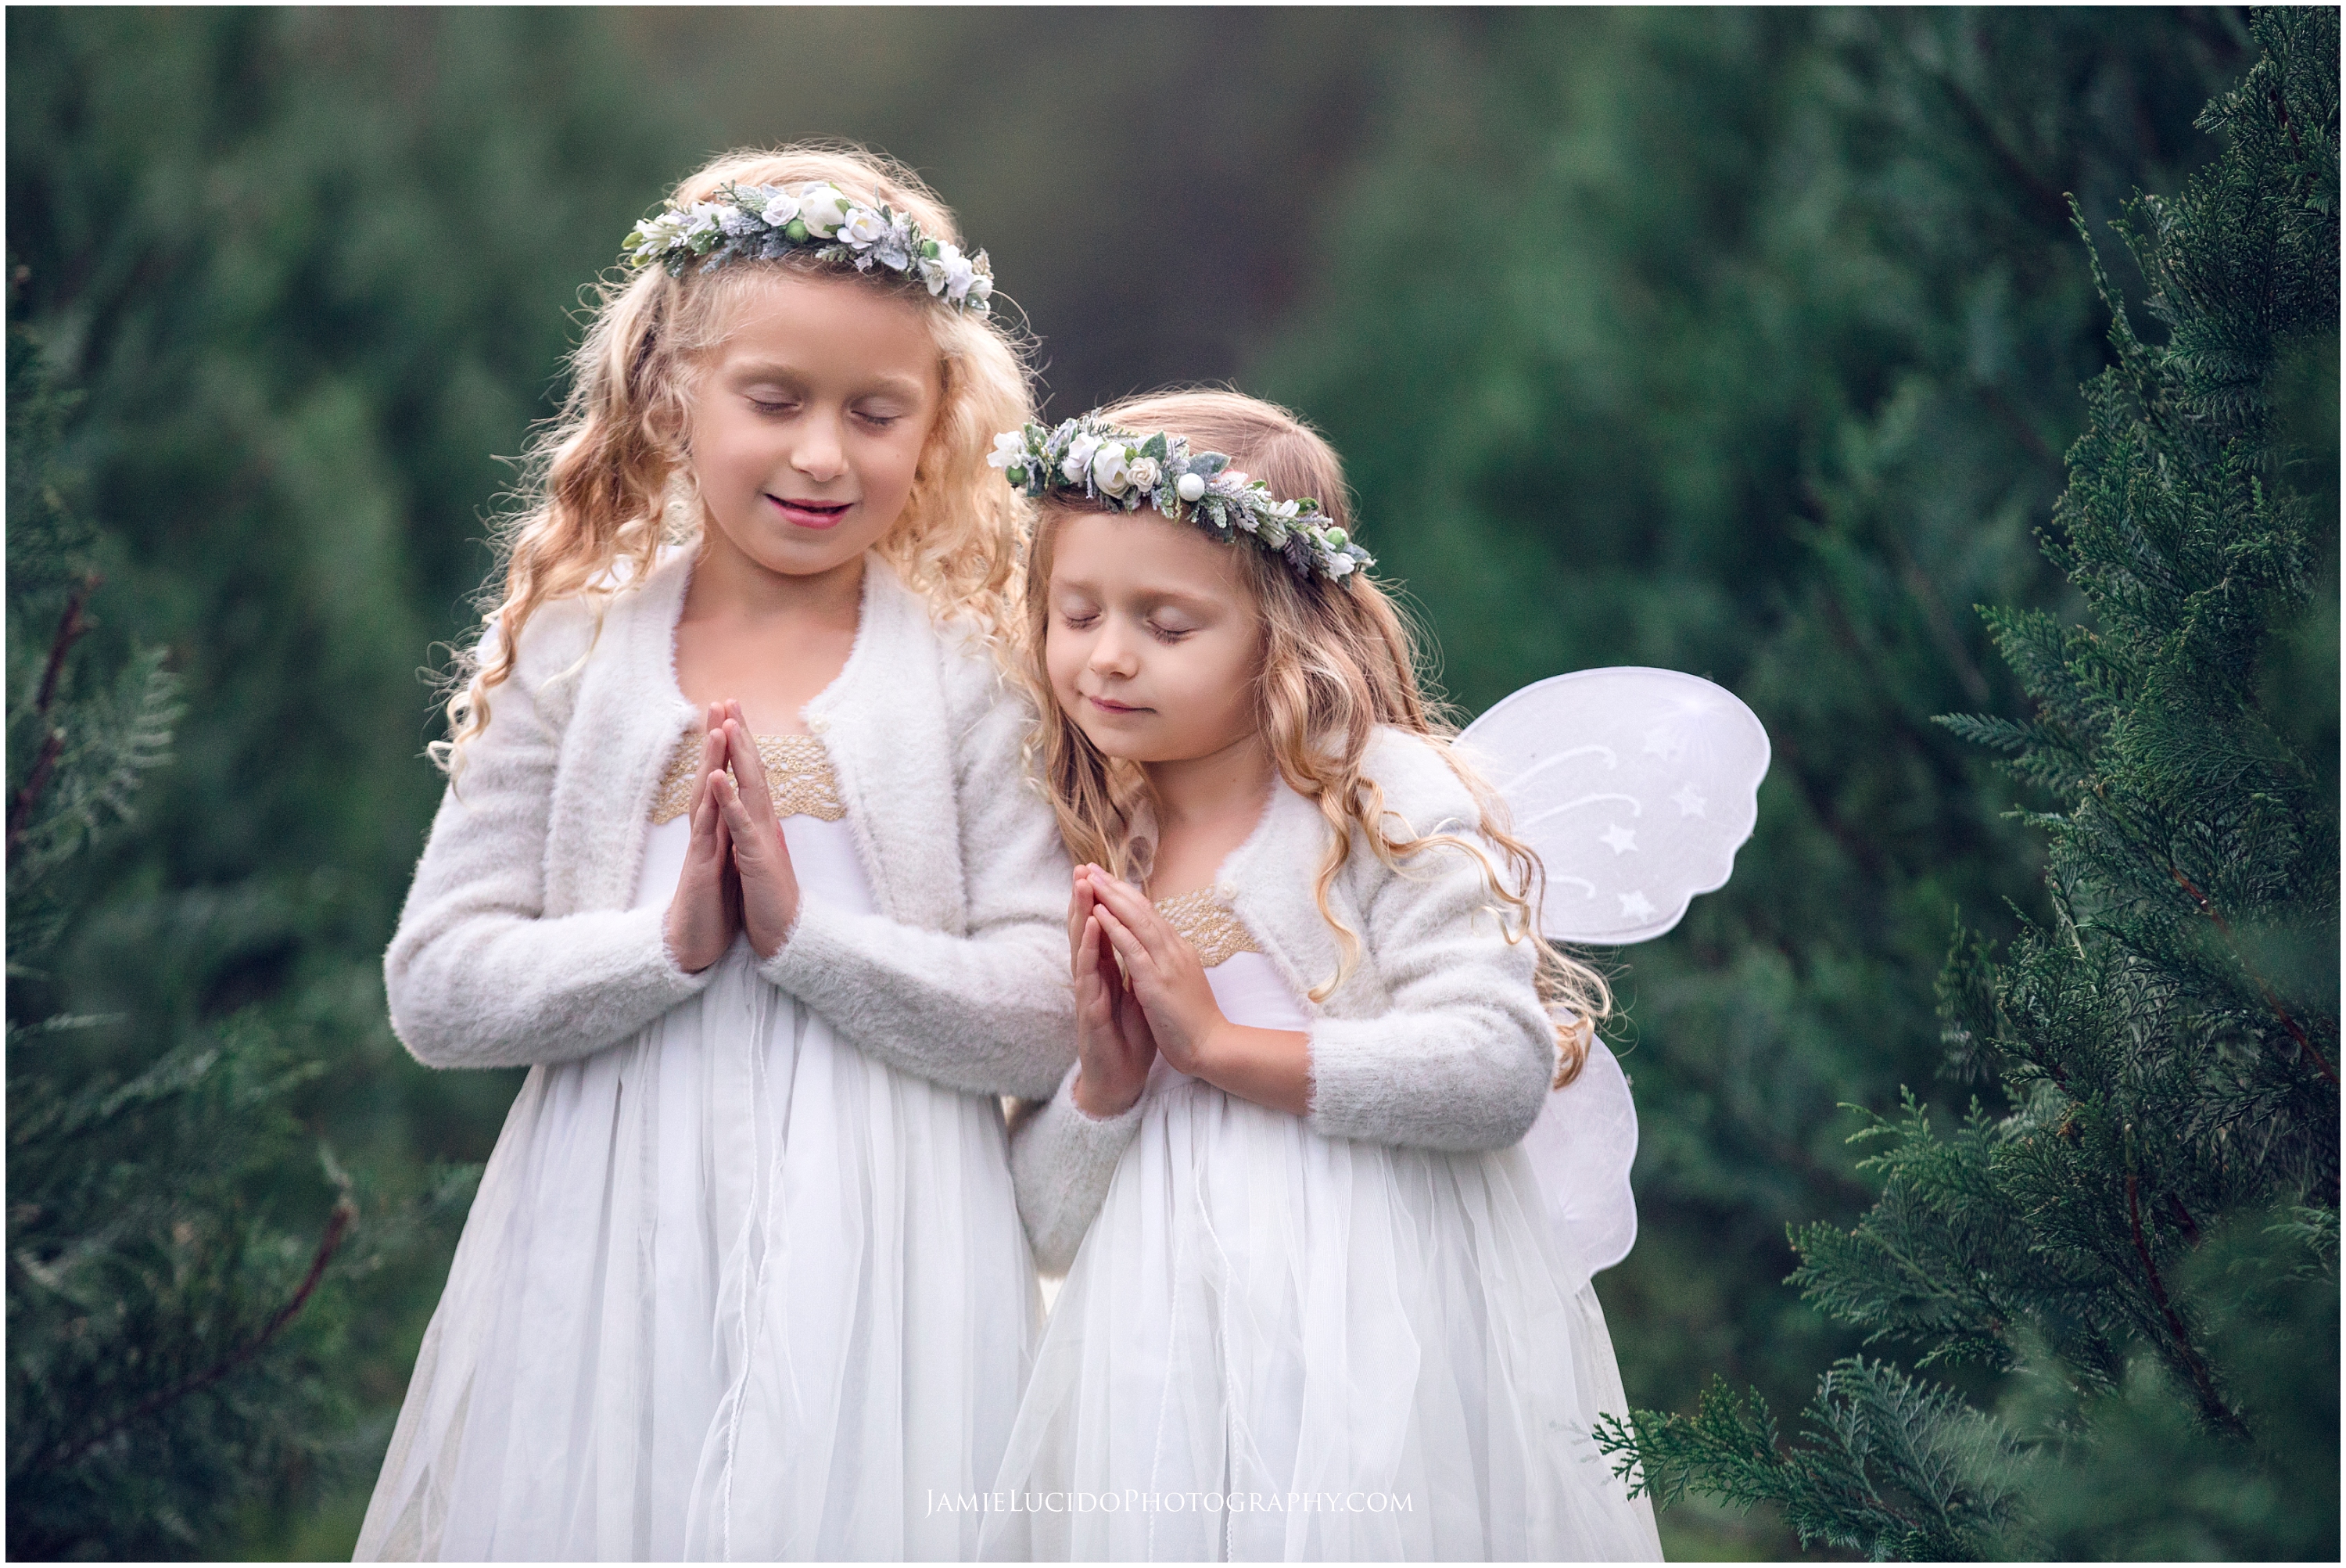 holiday photo idea, winter portrait, angels for christmas, children's photographer, styled photography, well dressed wolf, children's portrait, charlotte photographer, family photographer near me